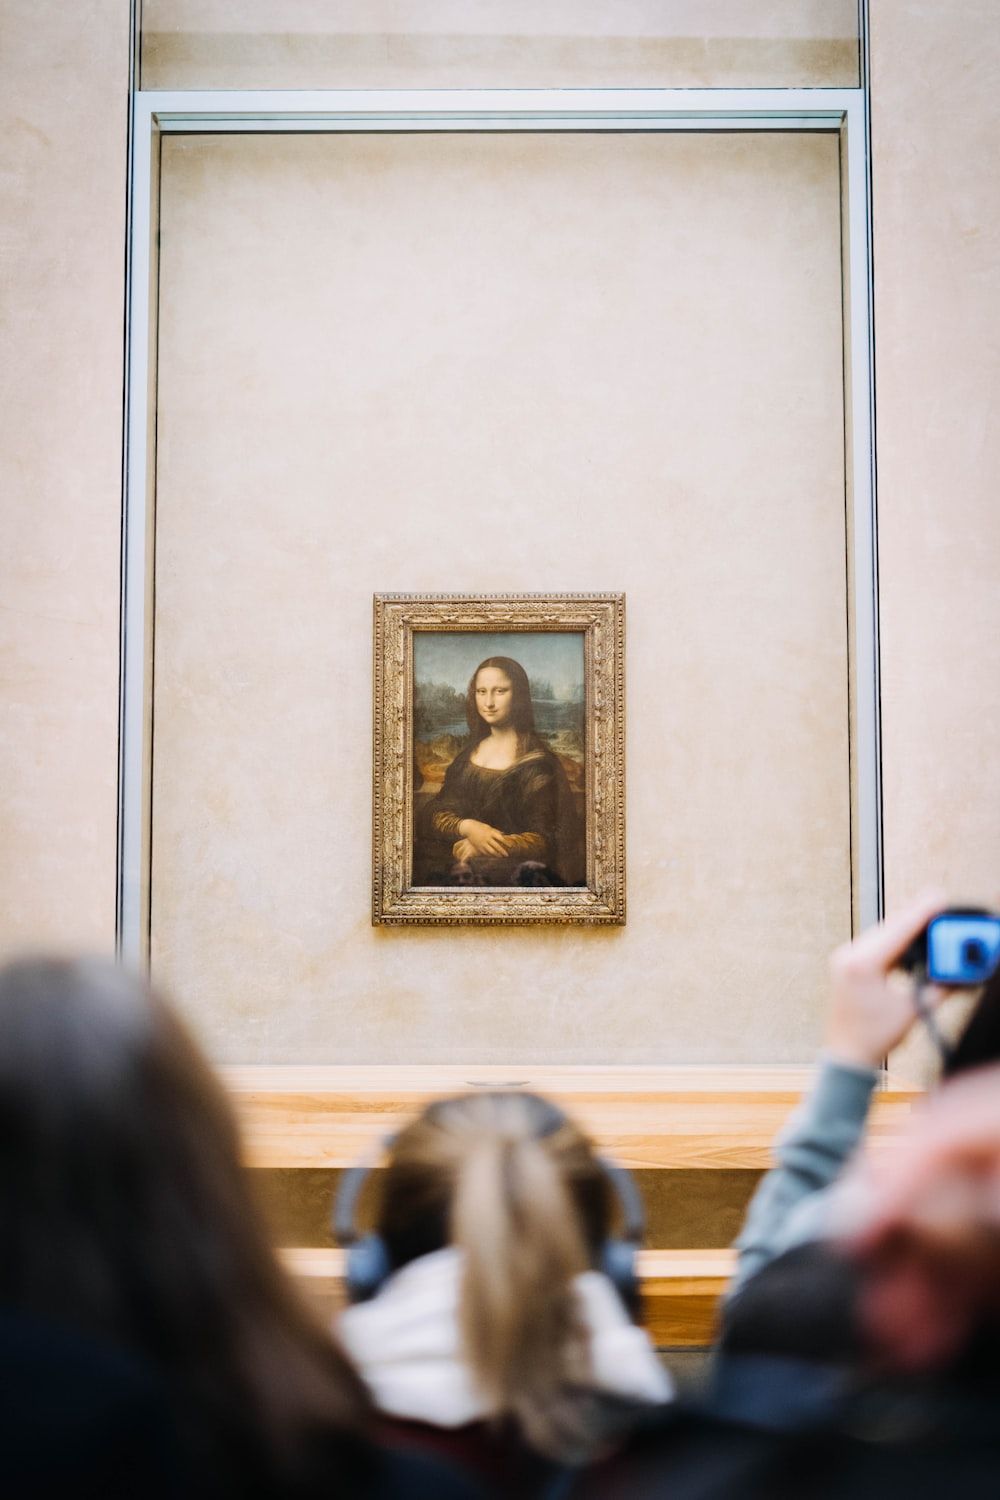 Mona Lisa Picture [HQ]. Download Free Image